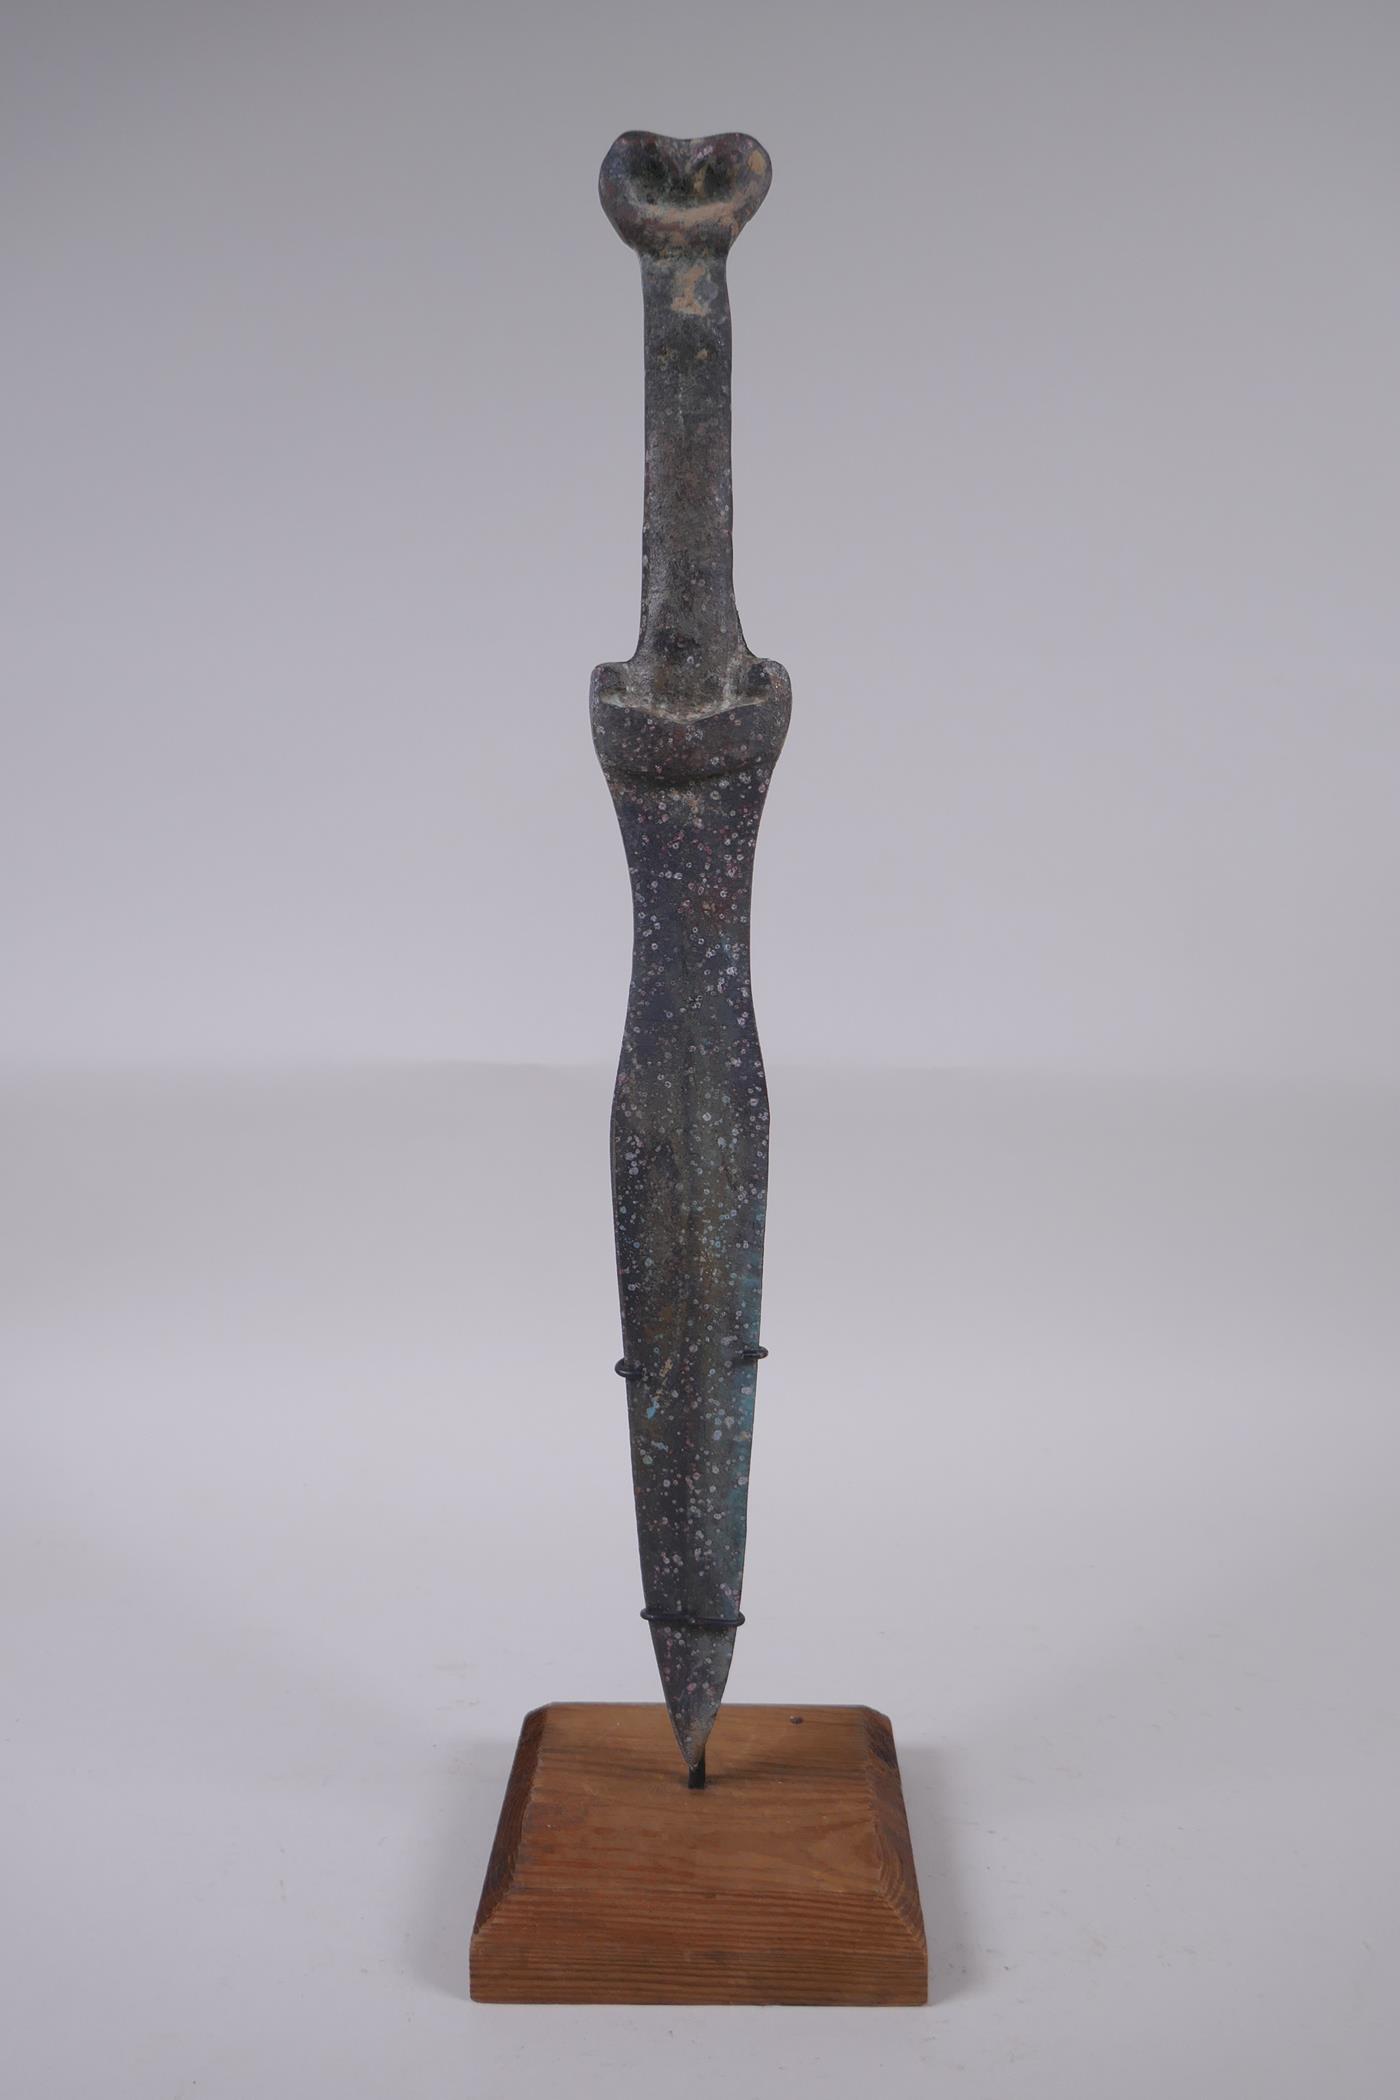 A Chinese archaic style bronze dagger on a display stand, 40cm high